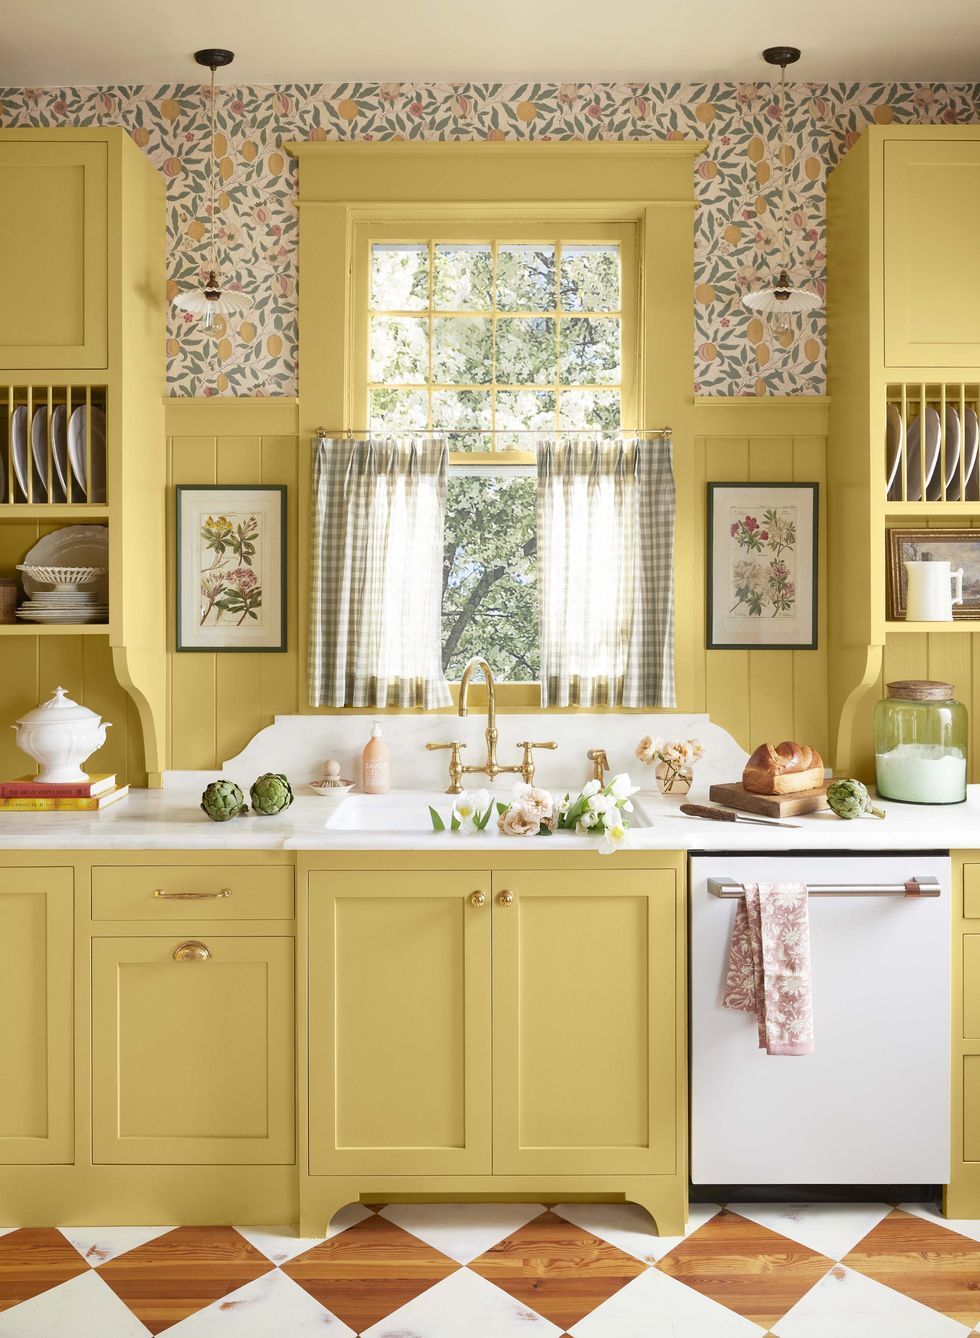 yellow kitchen cabinets with pedestal feet and hutch like upper cabinets with built in plate racks with brass hardware